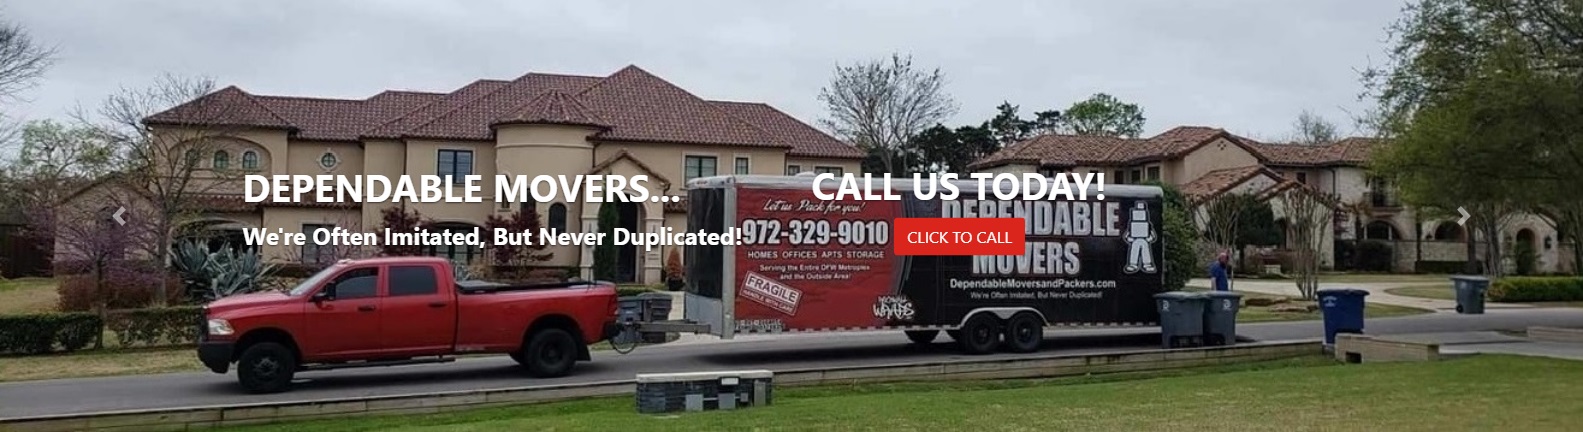 Dependable Movers Lewisville Mover Lewisville Moving Company - Home Office Apartment Movers Residential Commercial Movers in Lewisville Texas